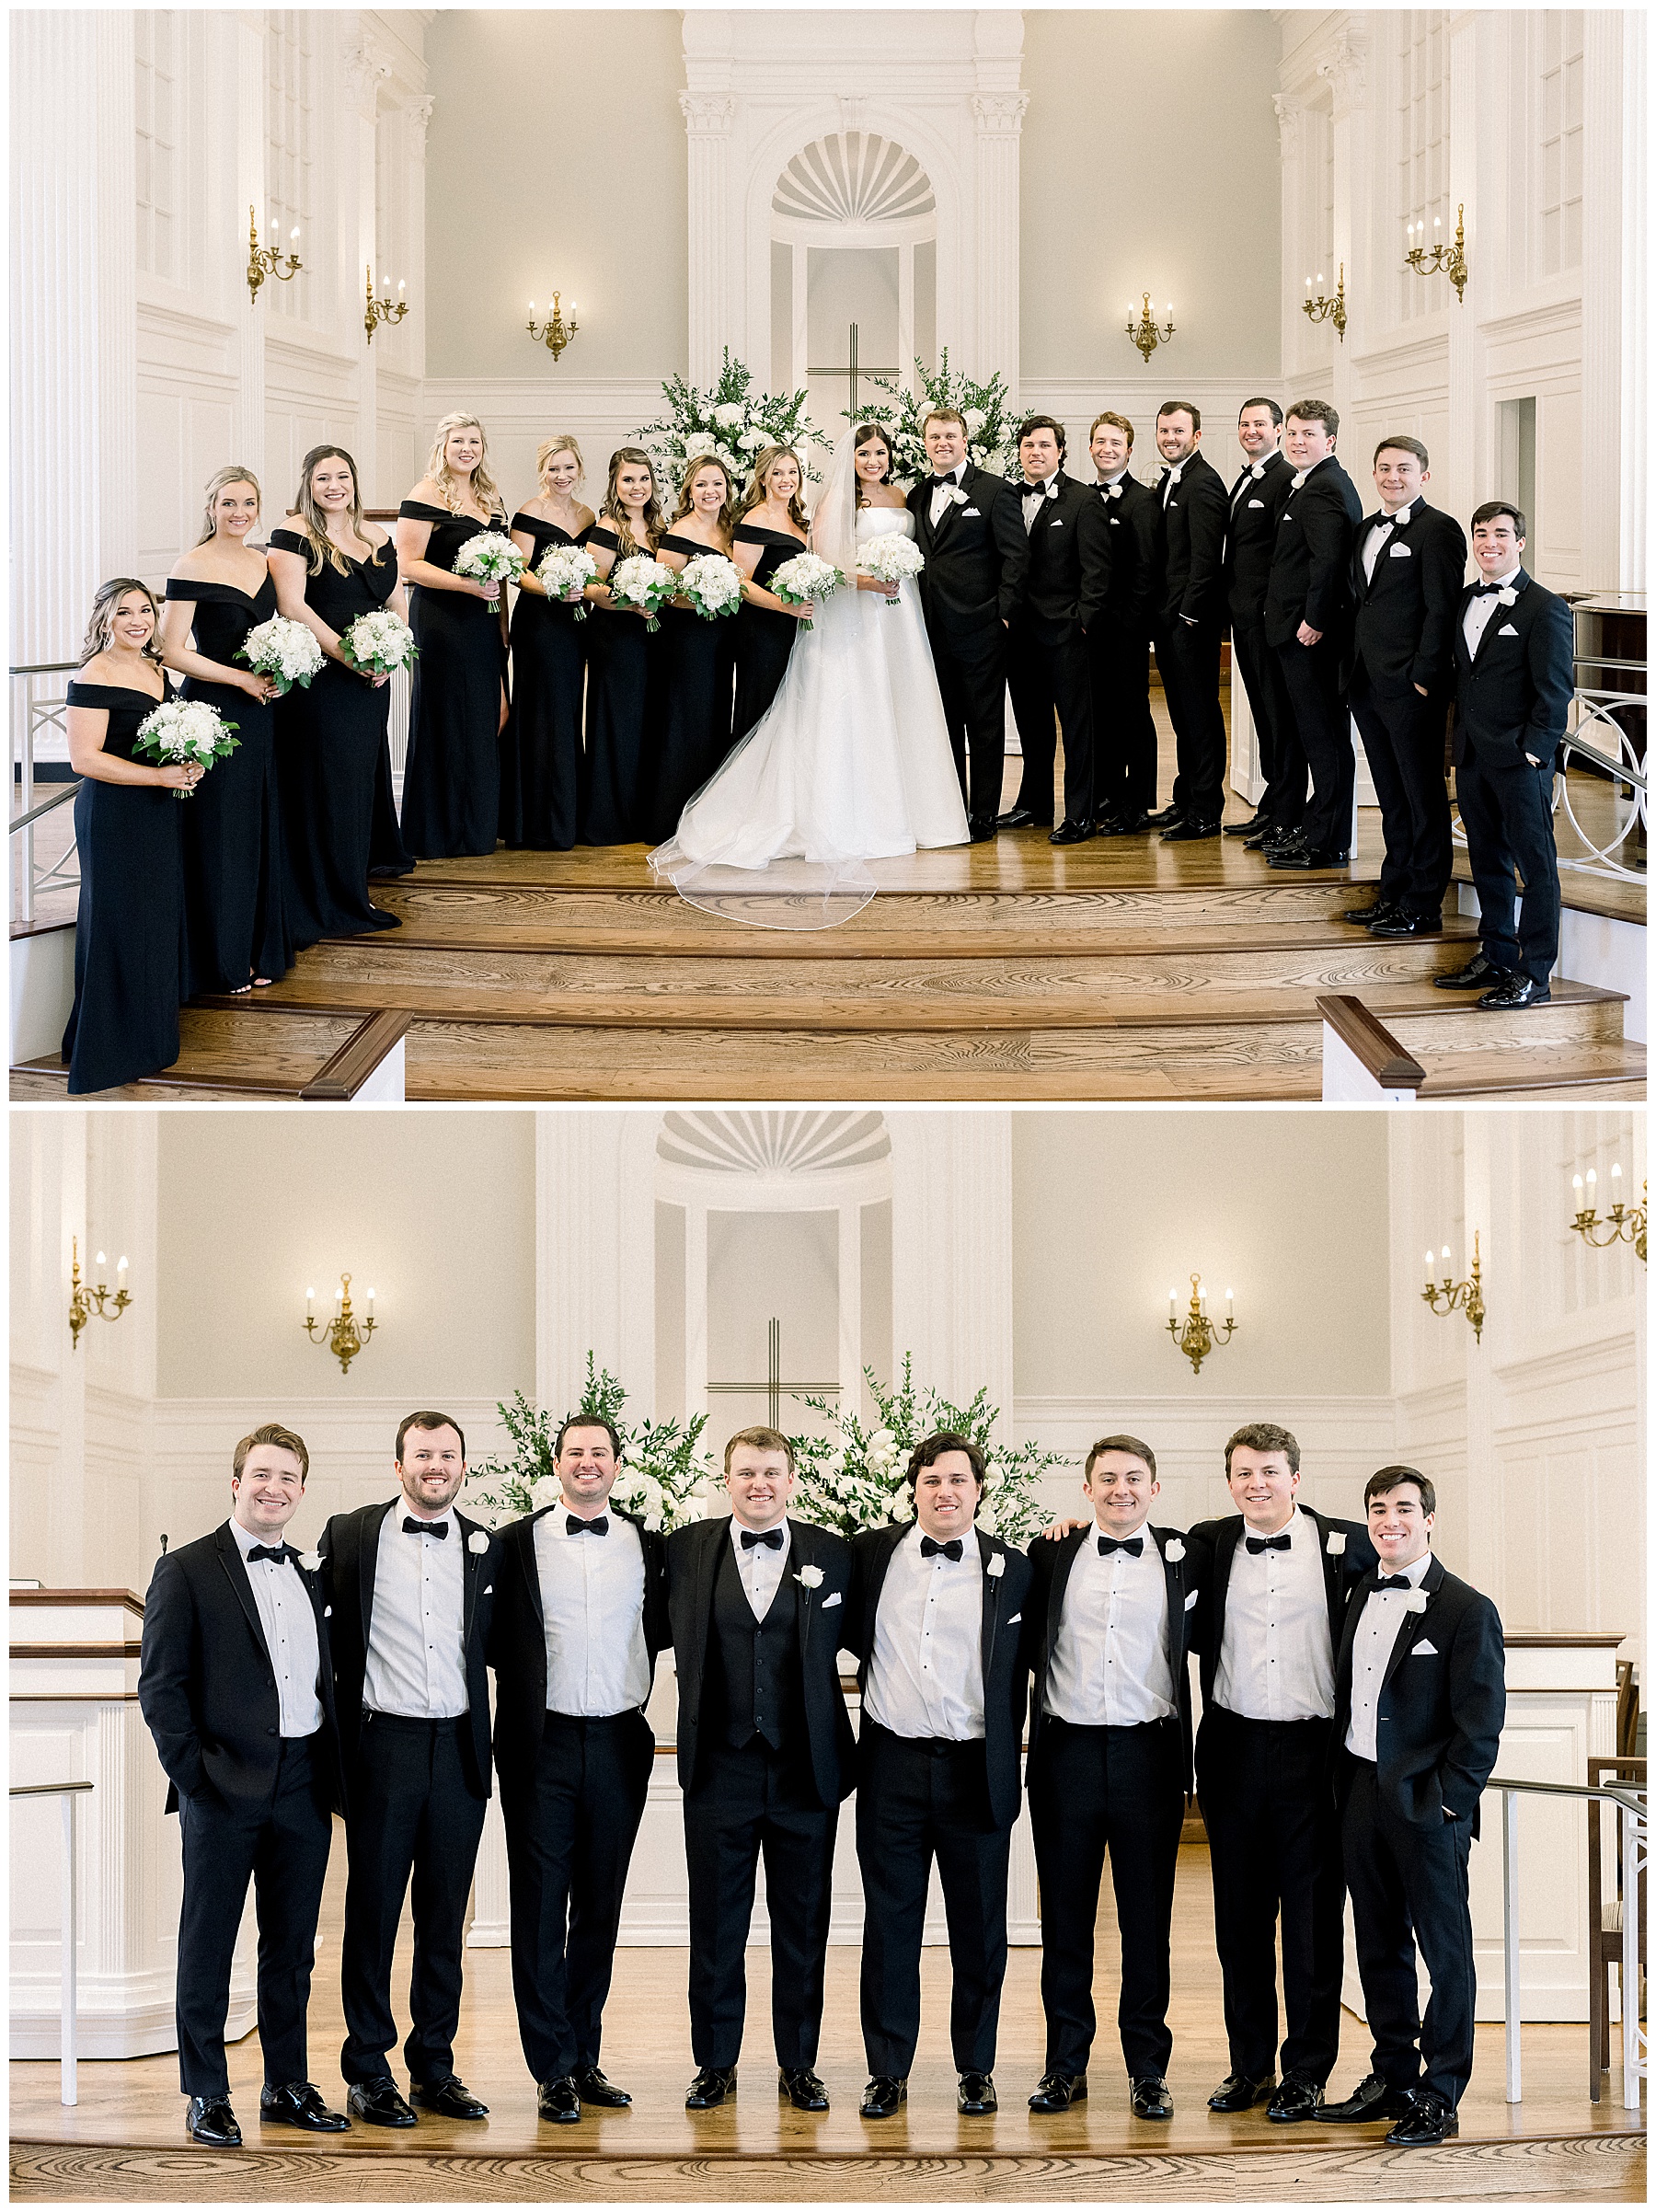 Wedding Party and groomsmen with groom